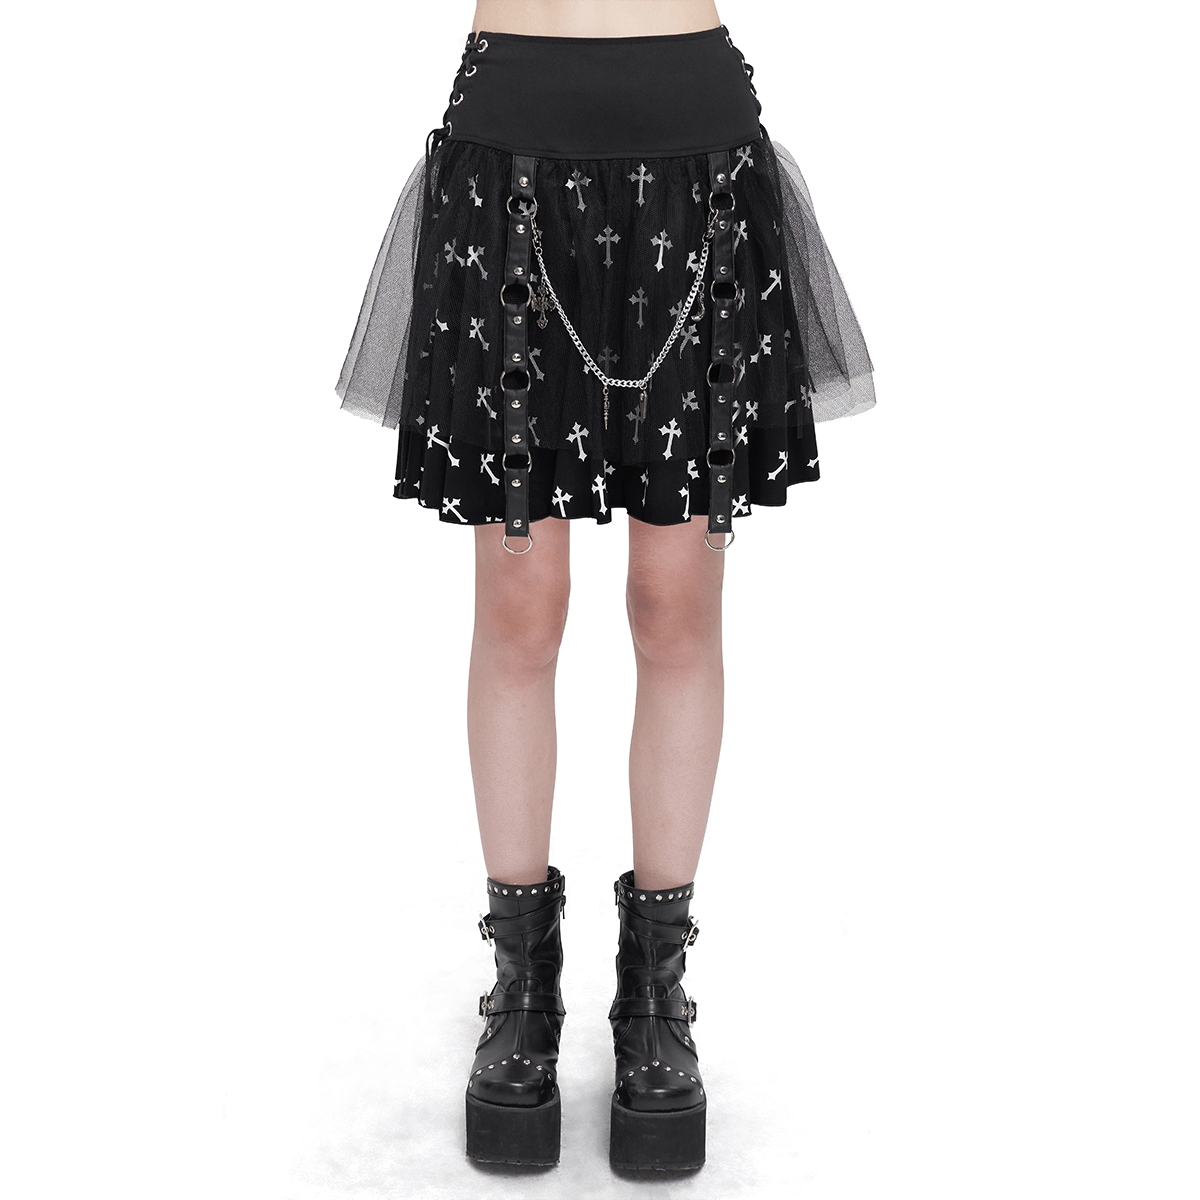 Black Knitted Skirt With White Crosses Print / Punk Women's Skirt with Side Waist Straps and Chain